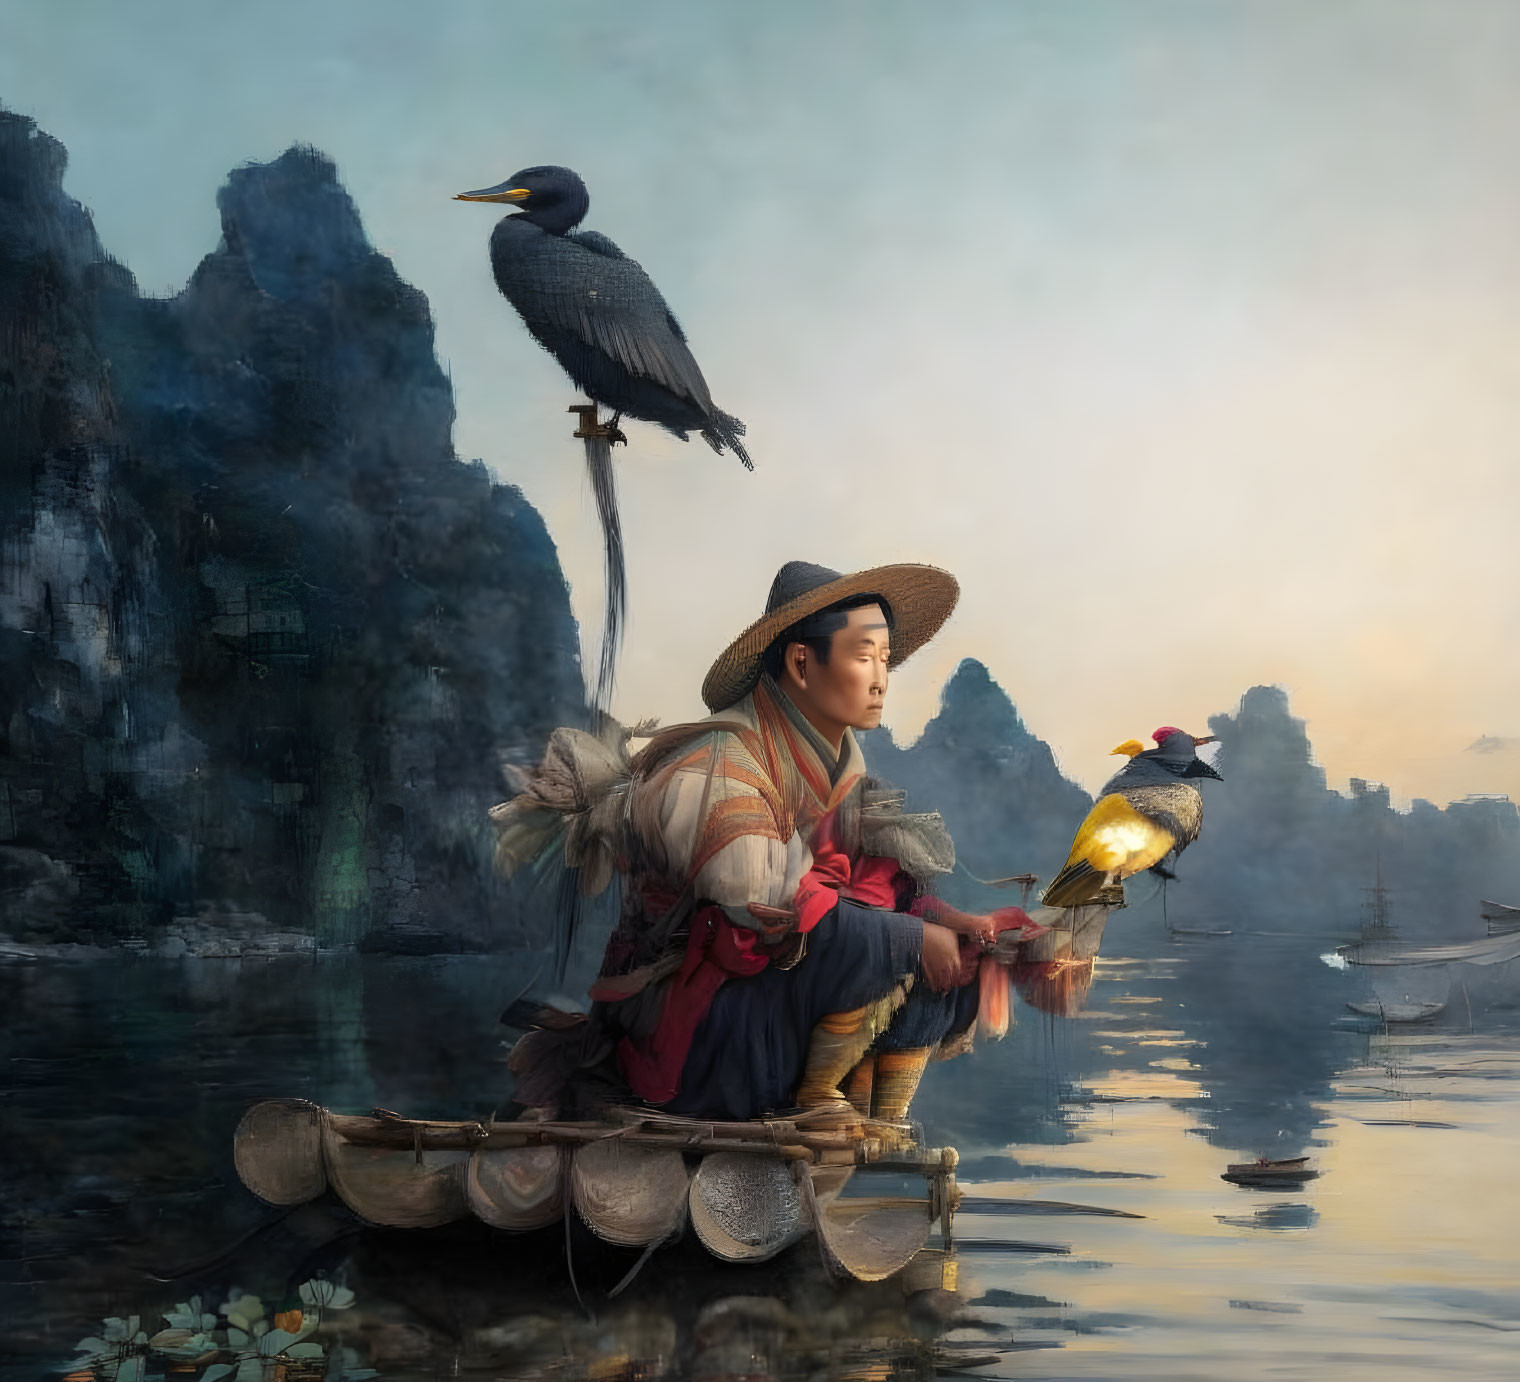 Chinese fisherman with his cormorant